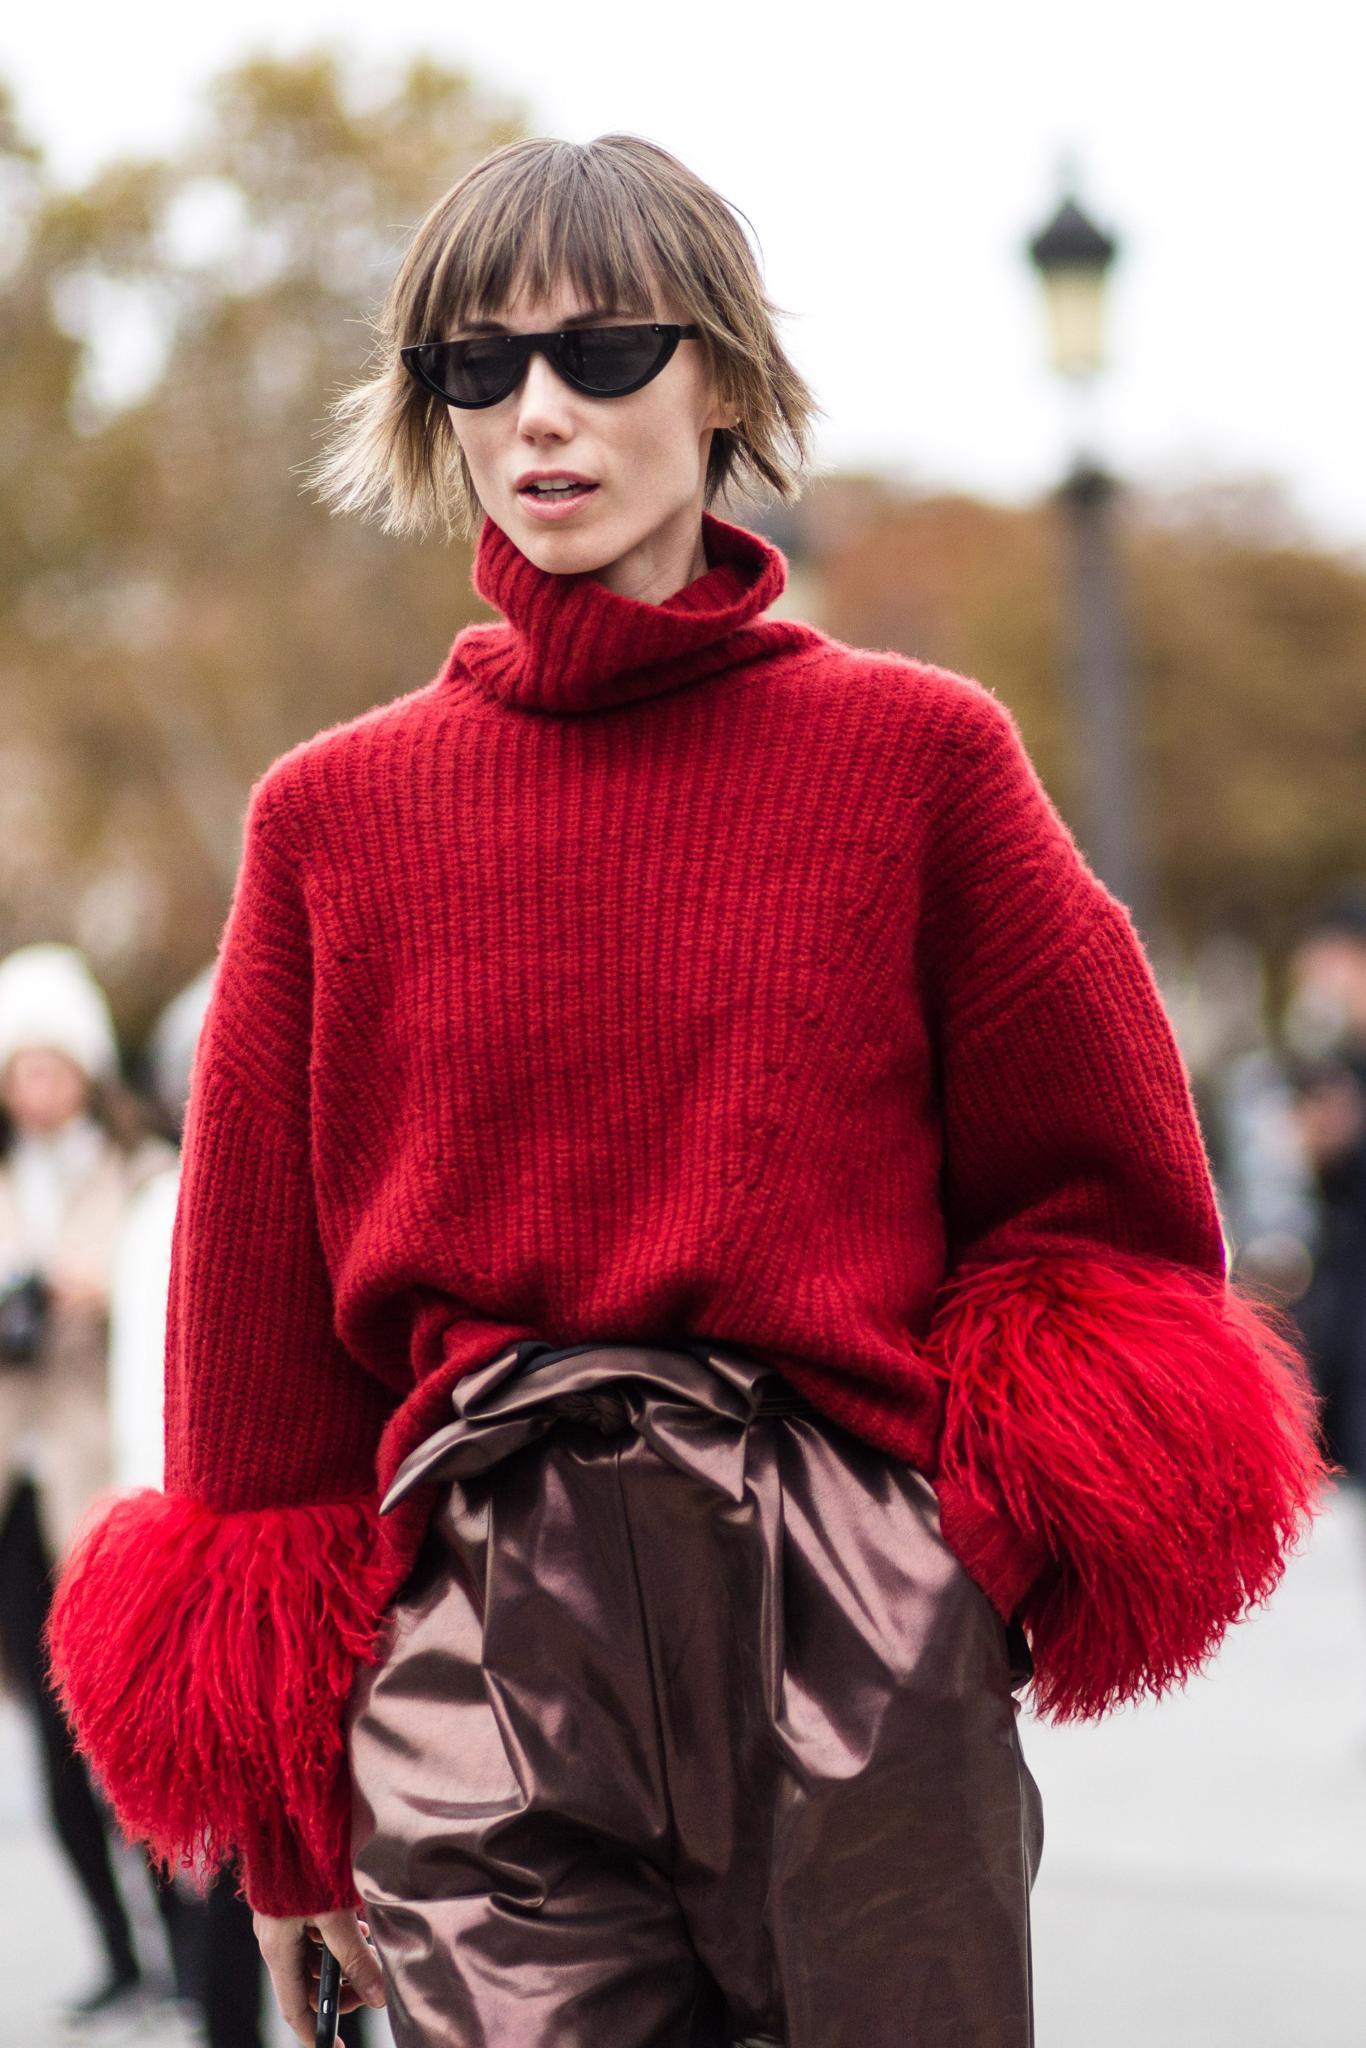 Sweater Weather Hairstyles: 5 Cozy Styles to Wear This Season | All ...